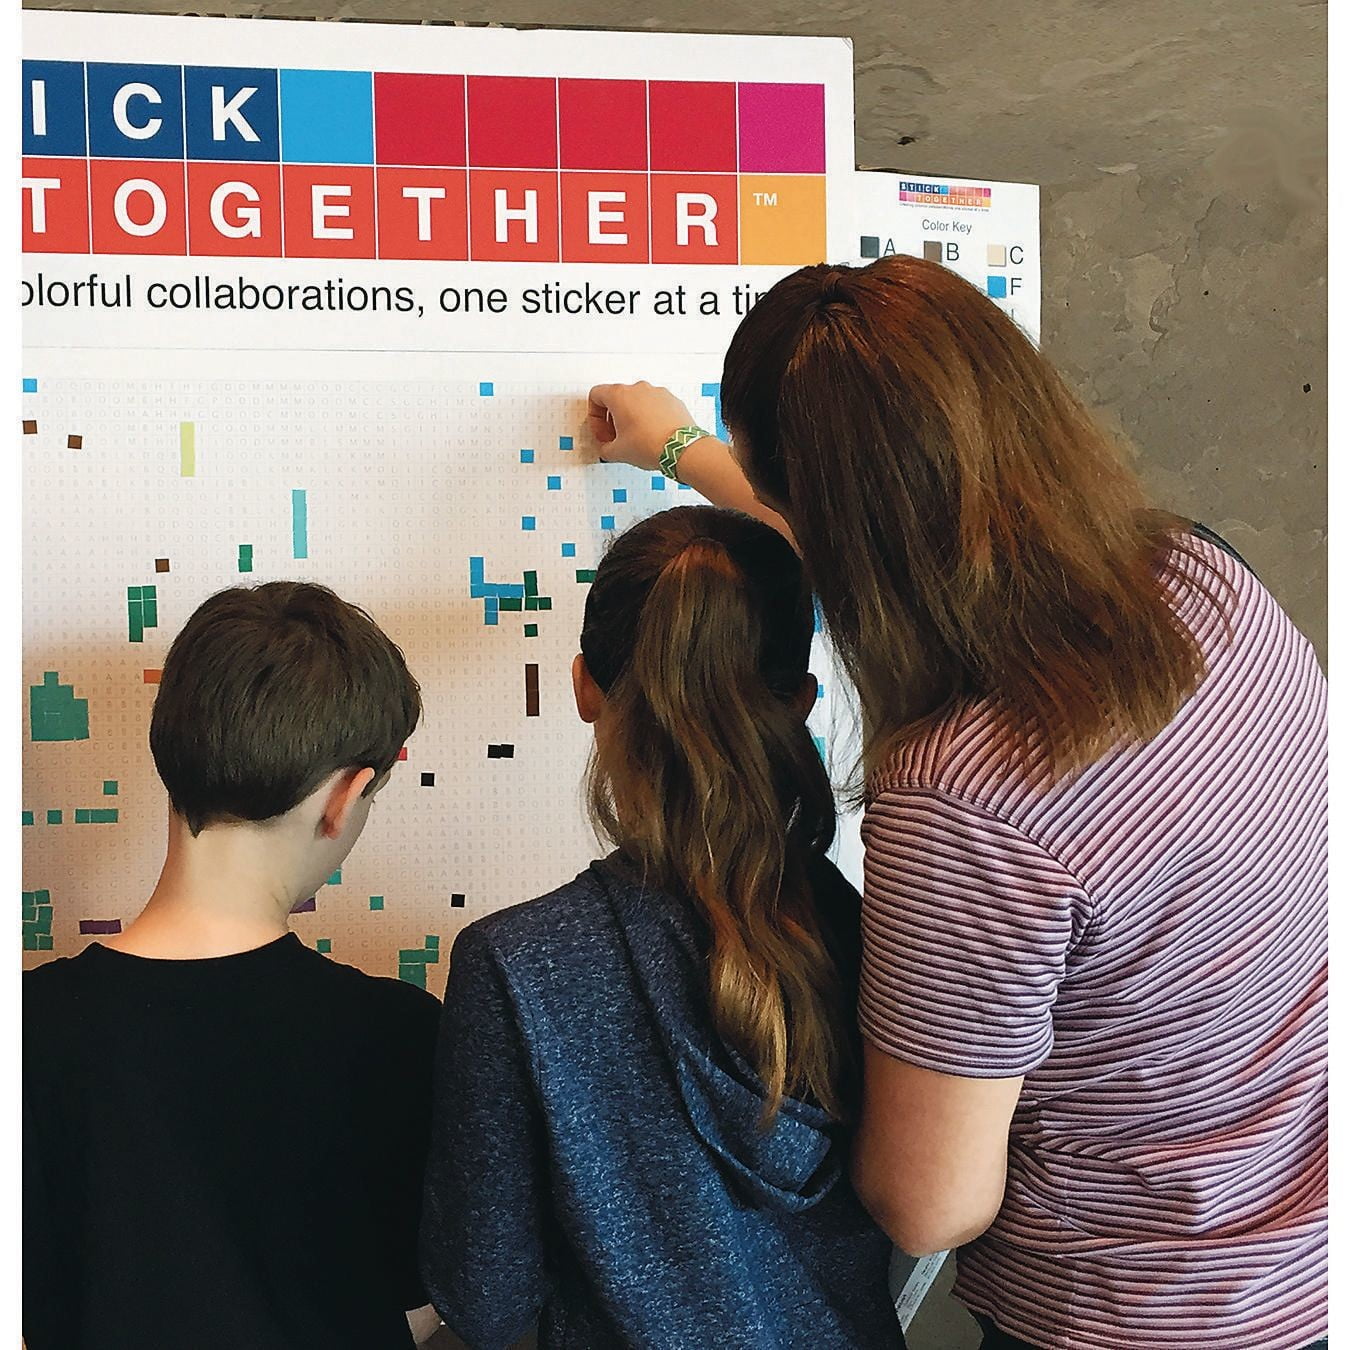 Stick Together Mosaic Hot Air Balloon Collaborative Poster Grid Sticker Kit  